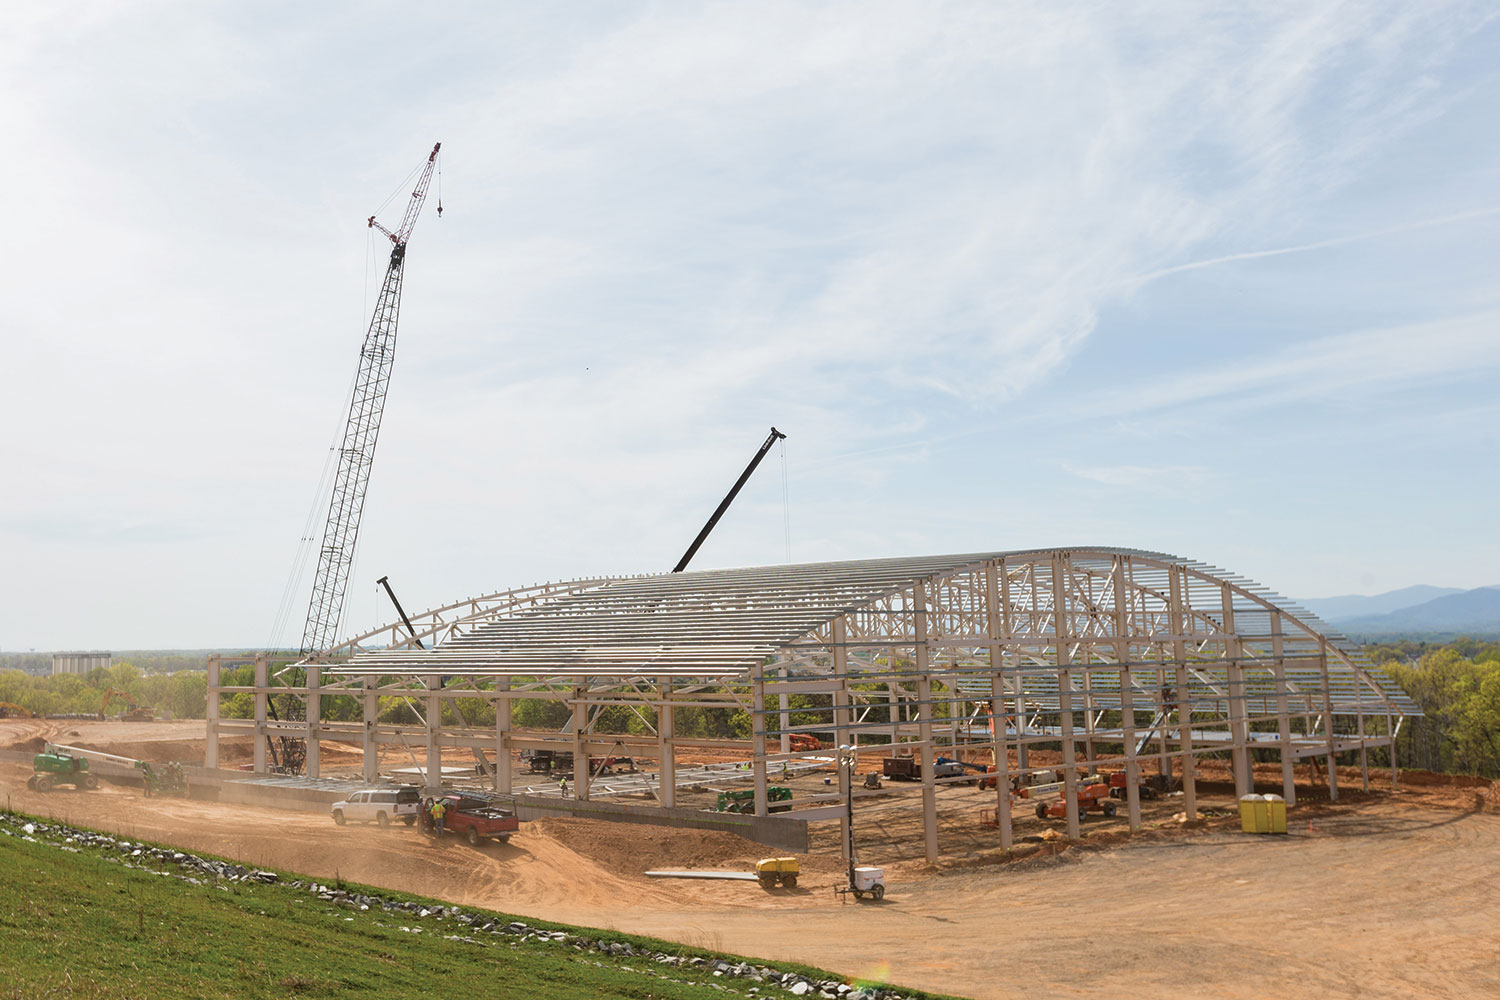 Steel and concrete work are ongoing at Liberty's new indoor track & field center.